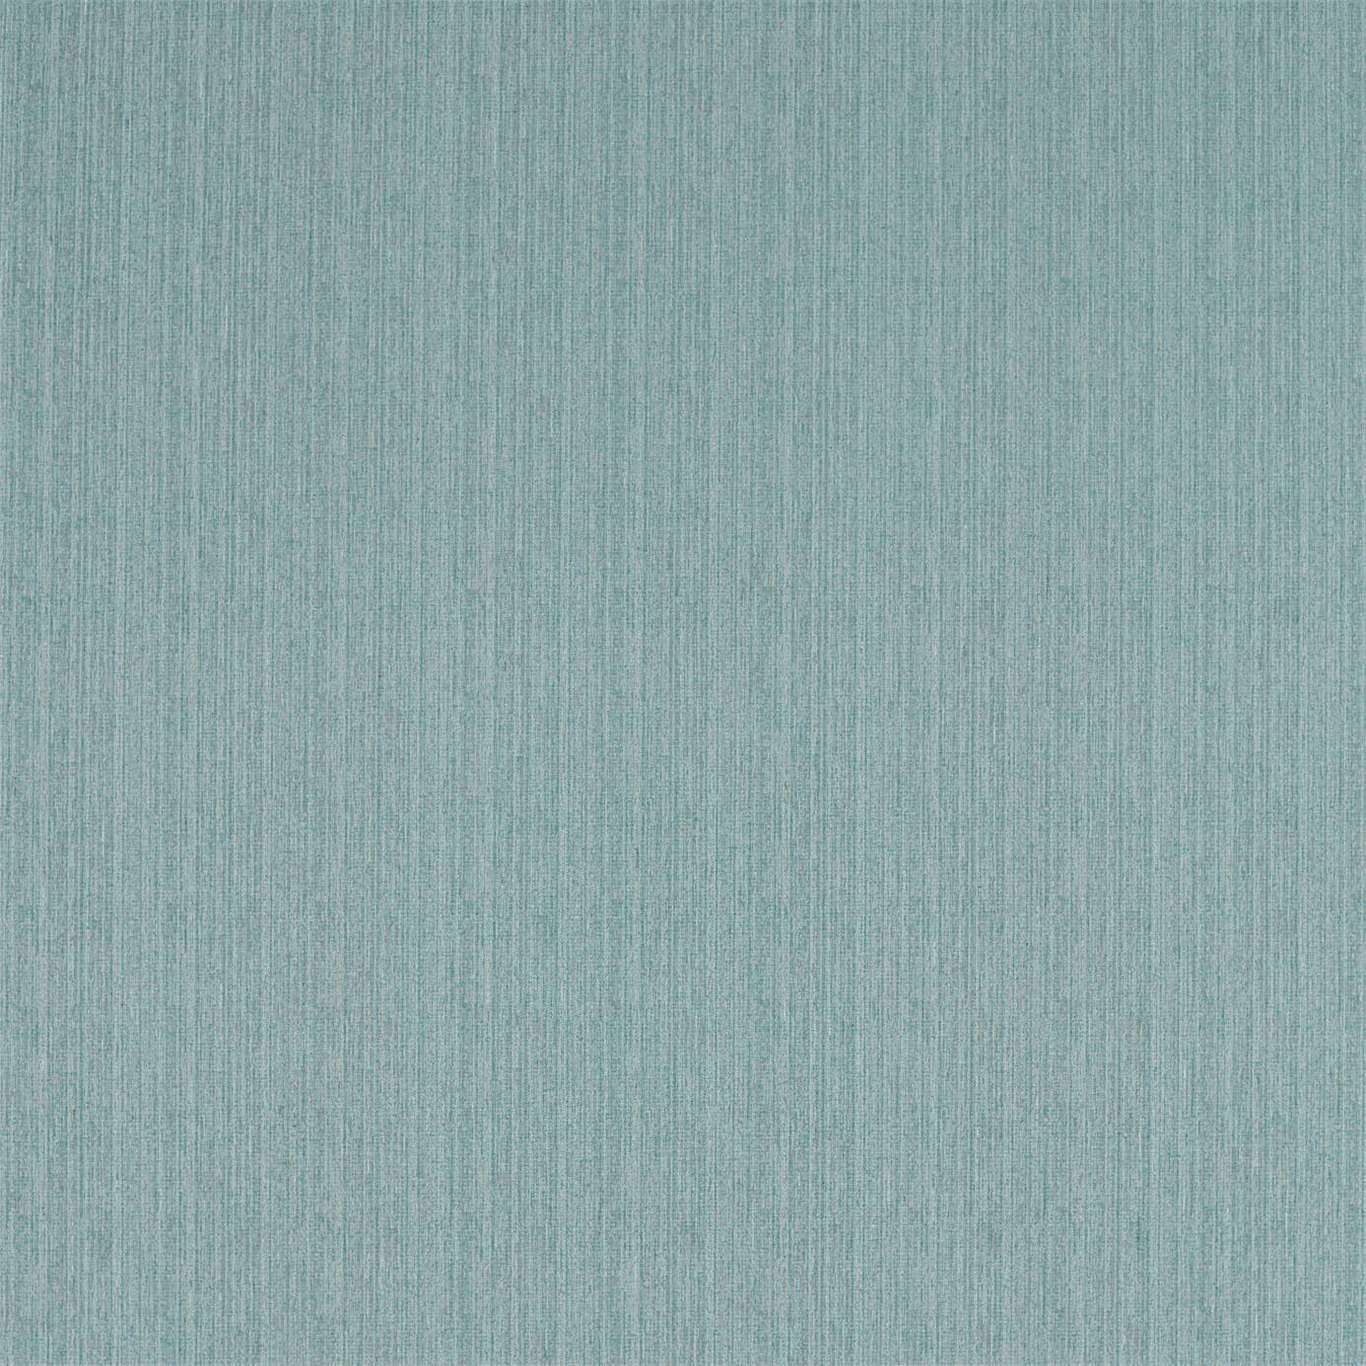 Spindlestone Teal Fabric by SAN